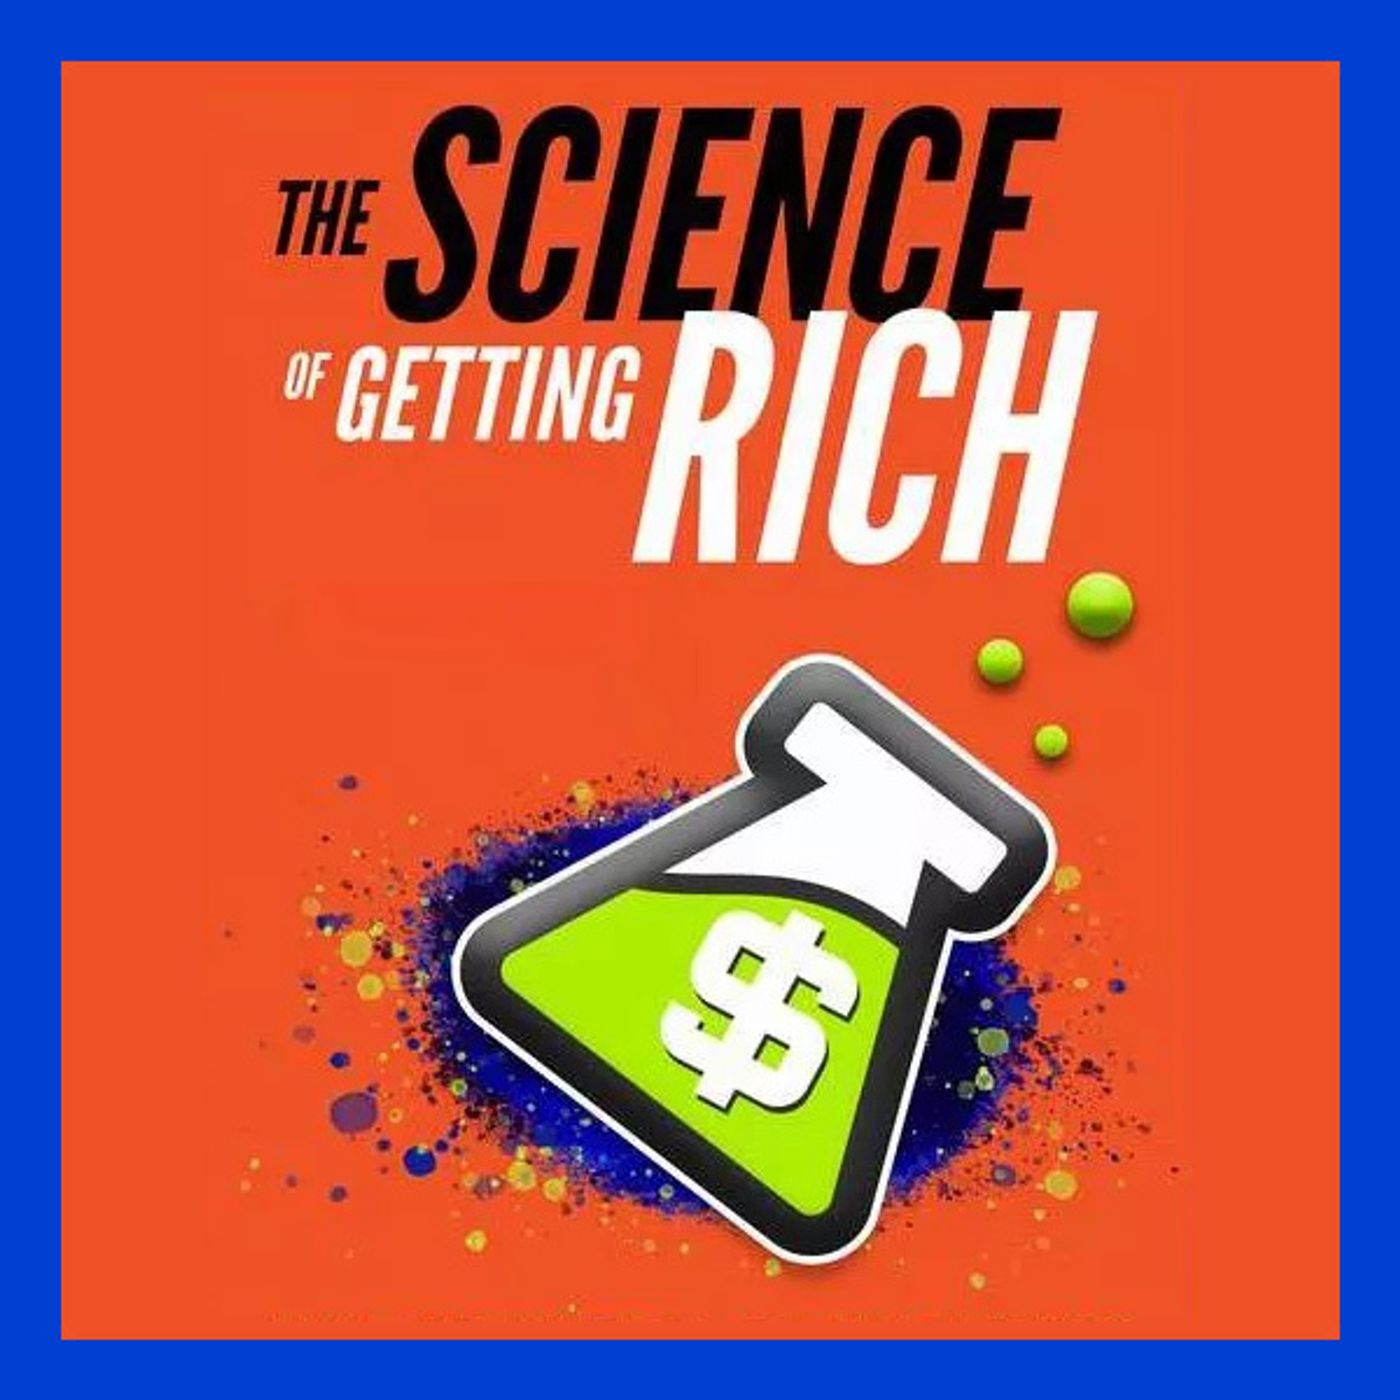 The Science of Getting Rich - Preface